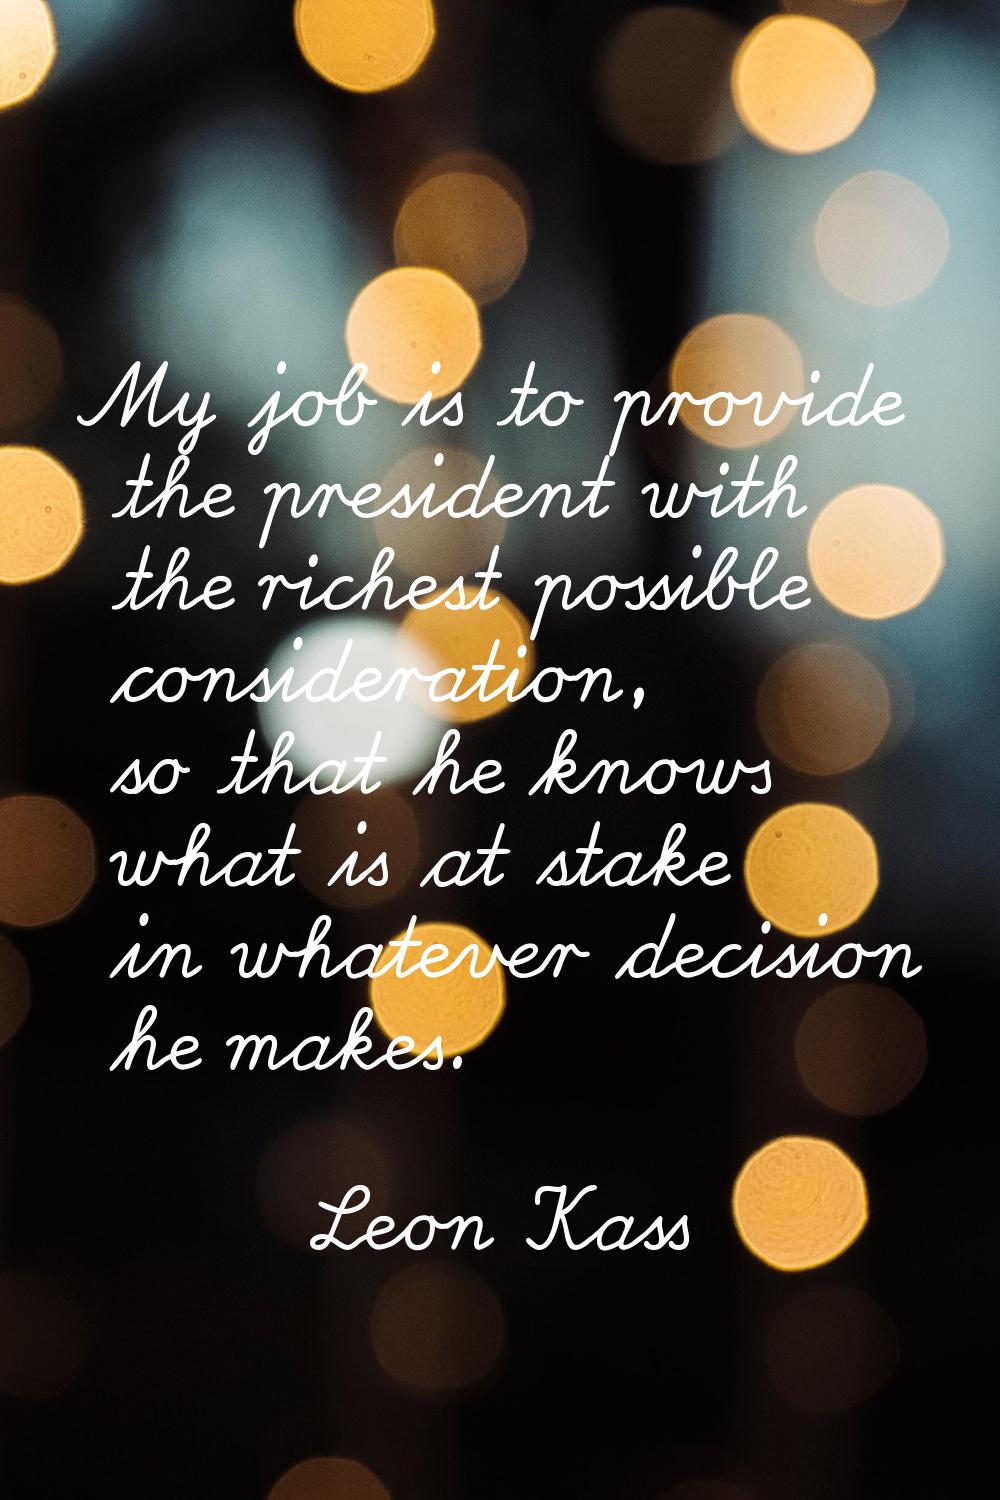 My job is to provide the president with the richest possible consideration, so that he knows what i